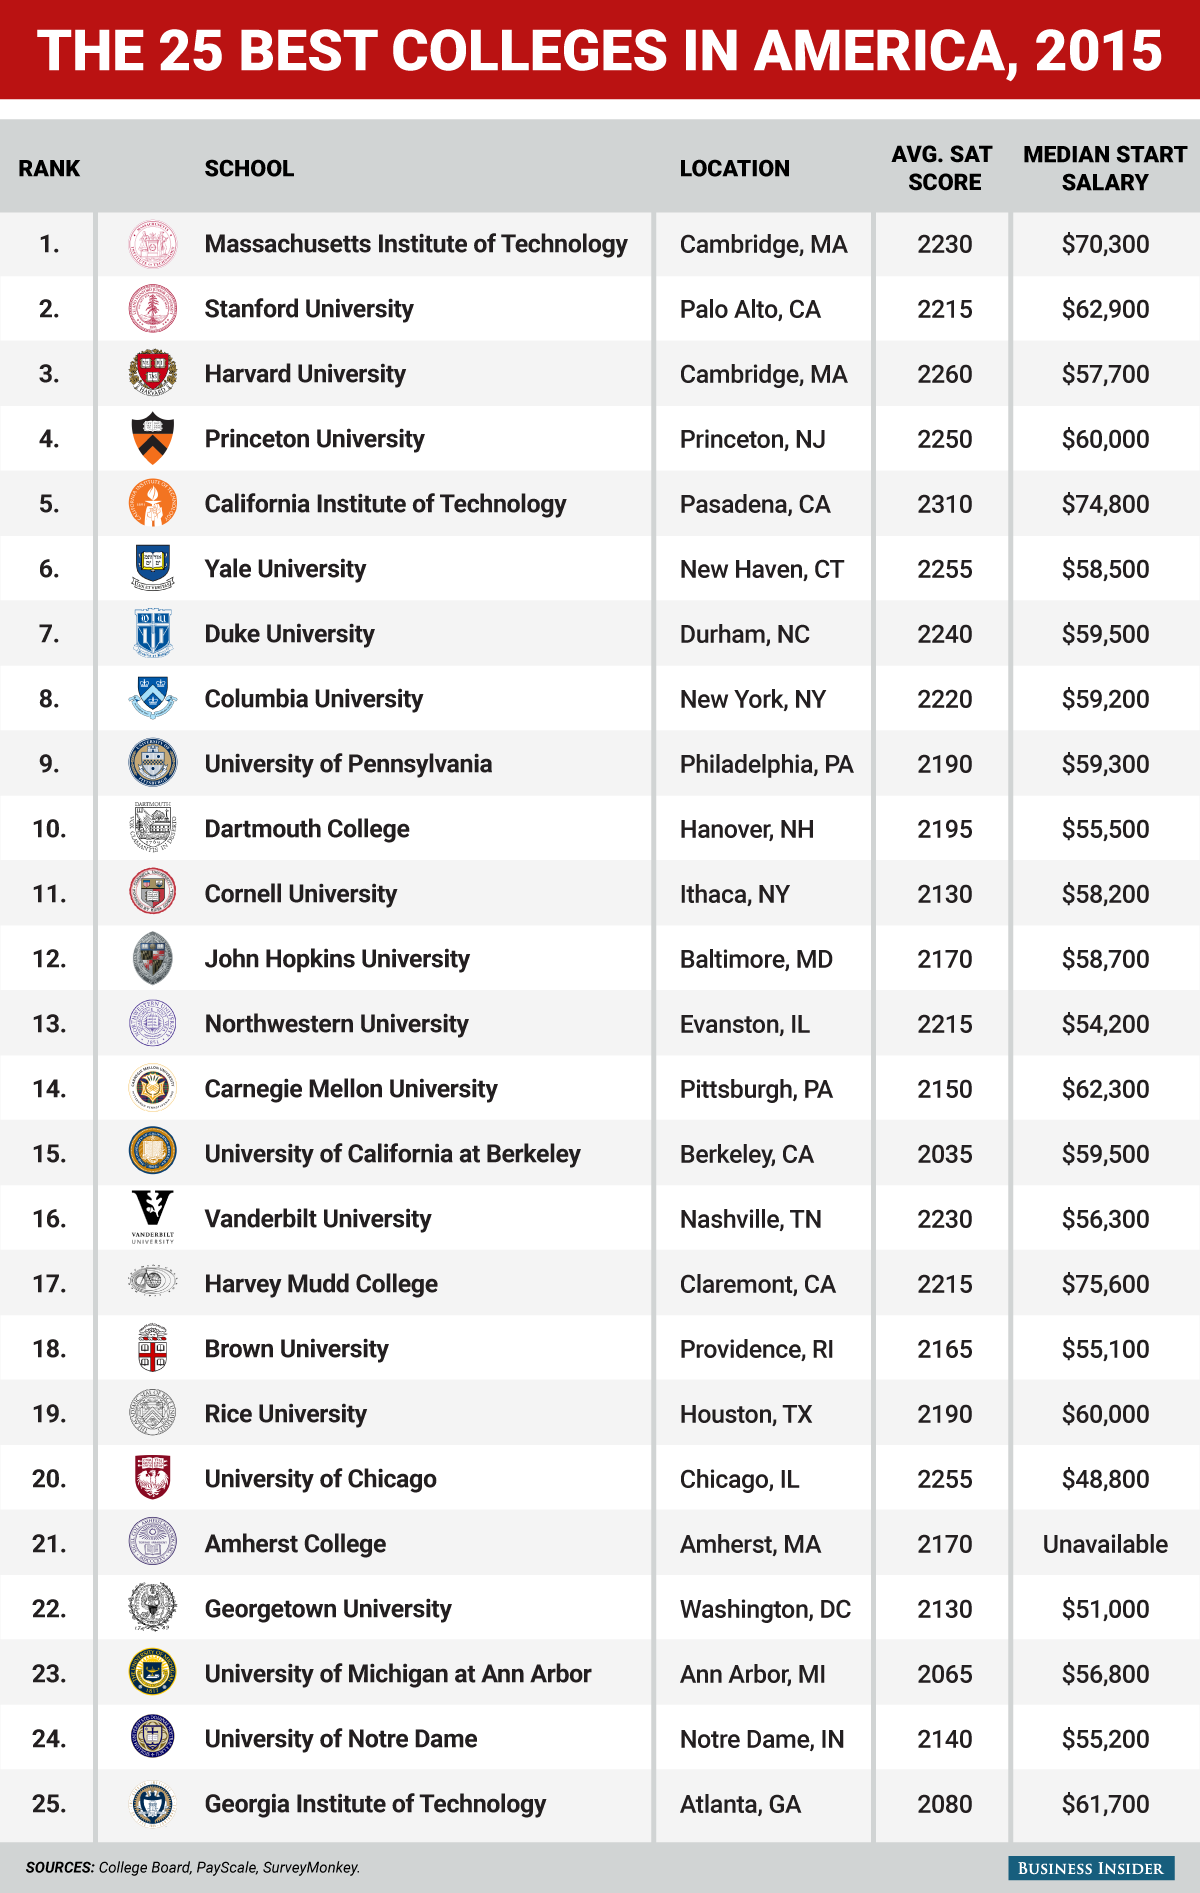 The top 25 colleges in America